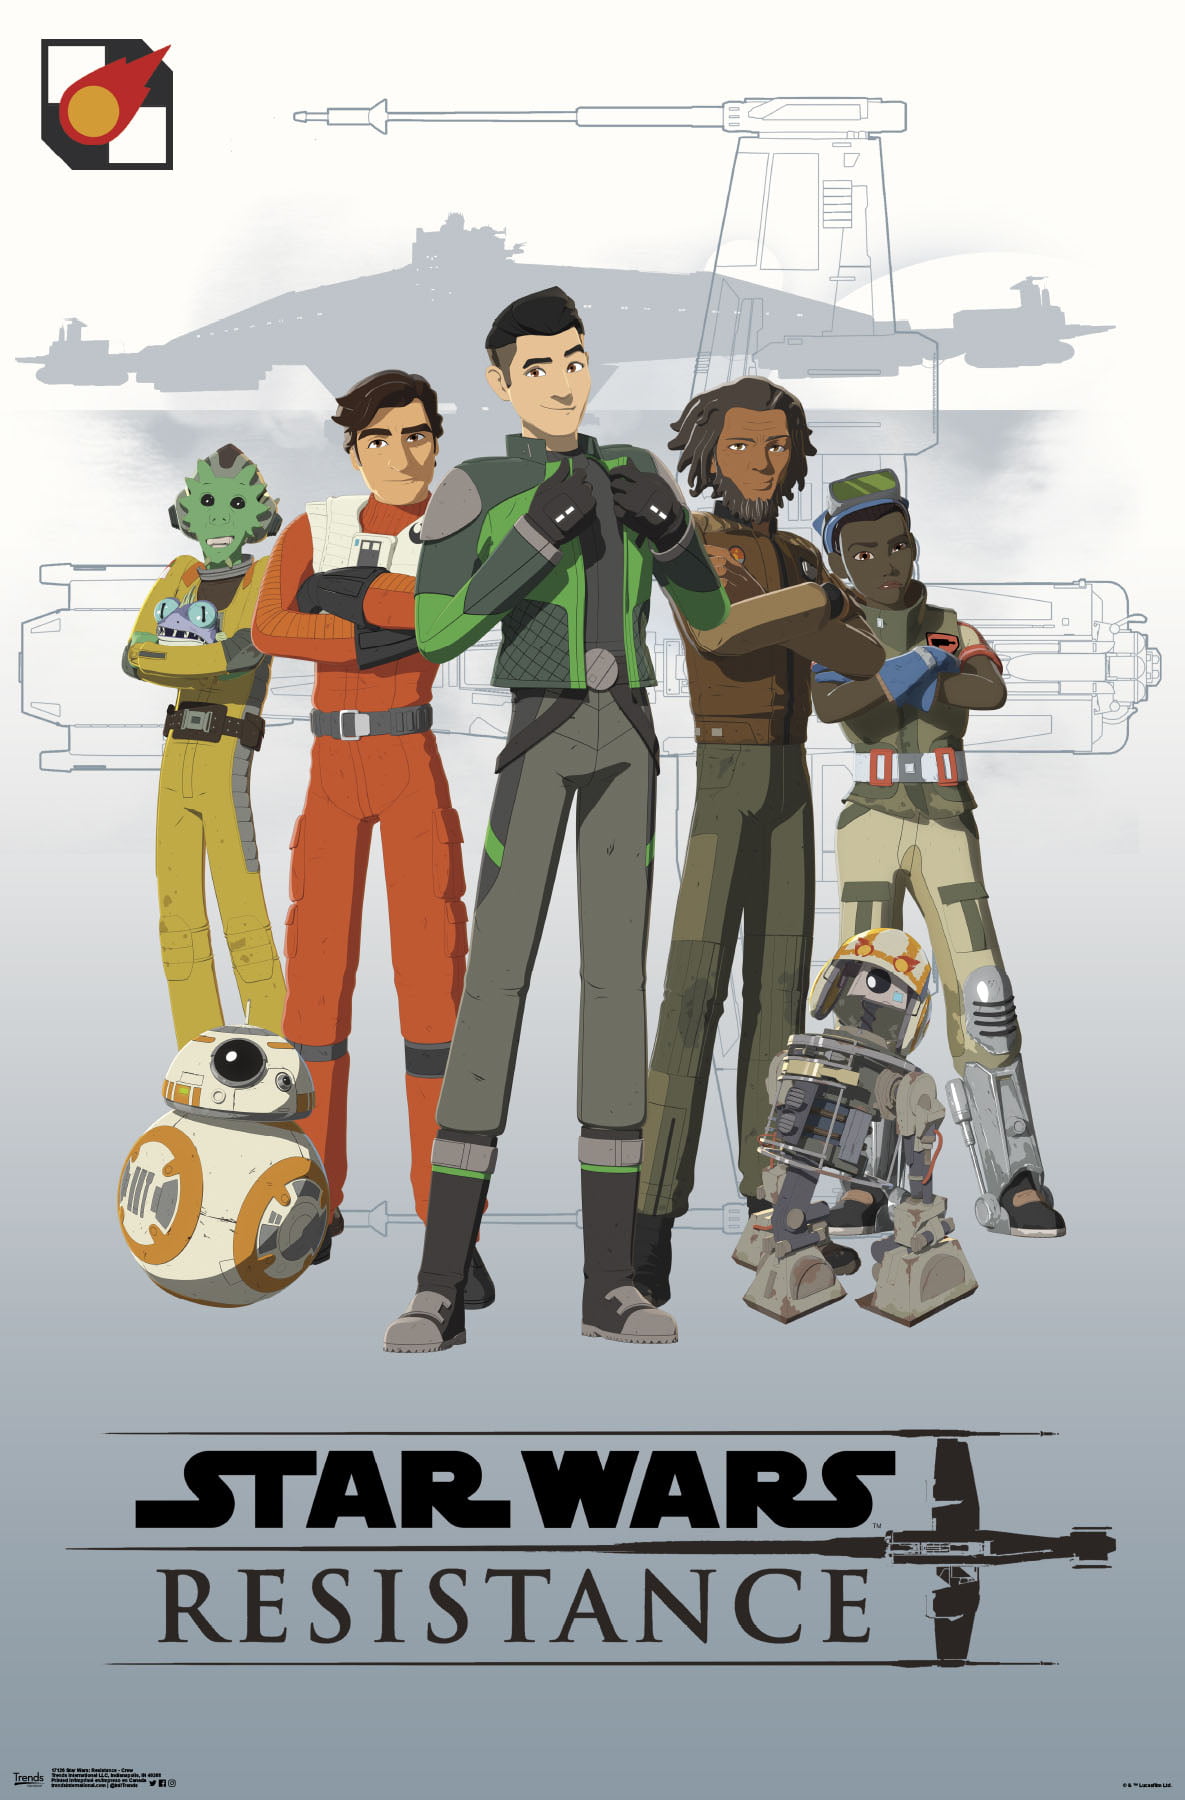 Star Wars: Resistance - Crew Wall Poster, 22.375 x 34 